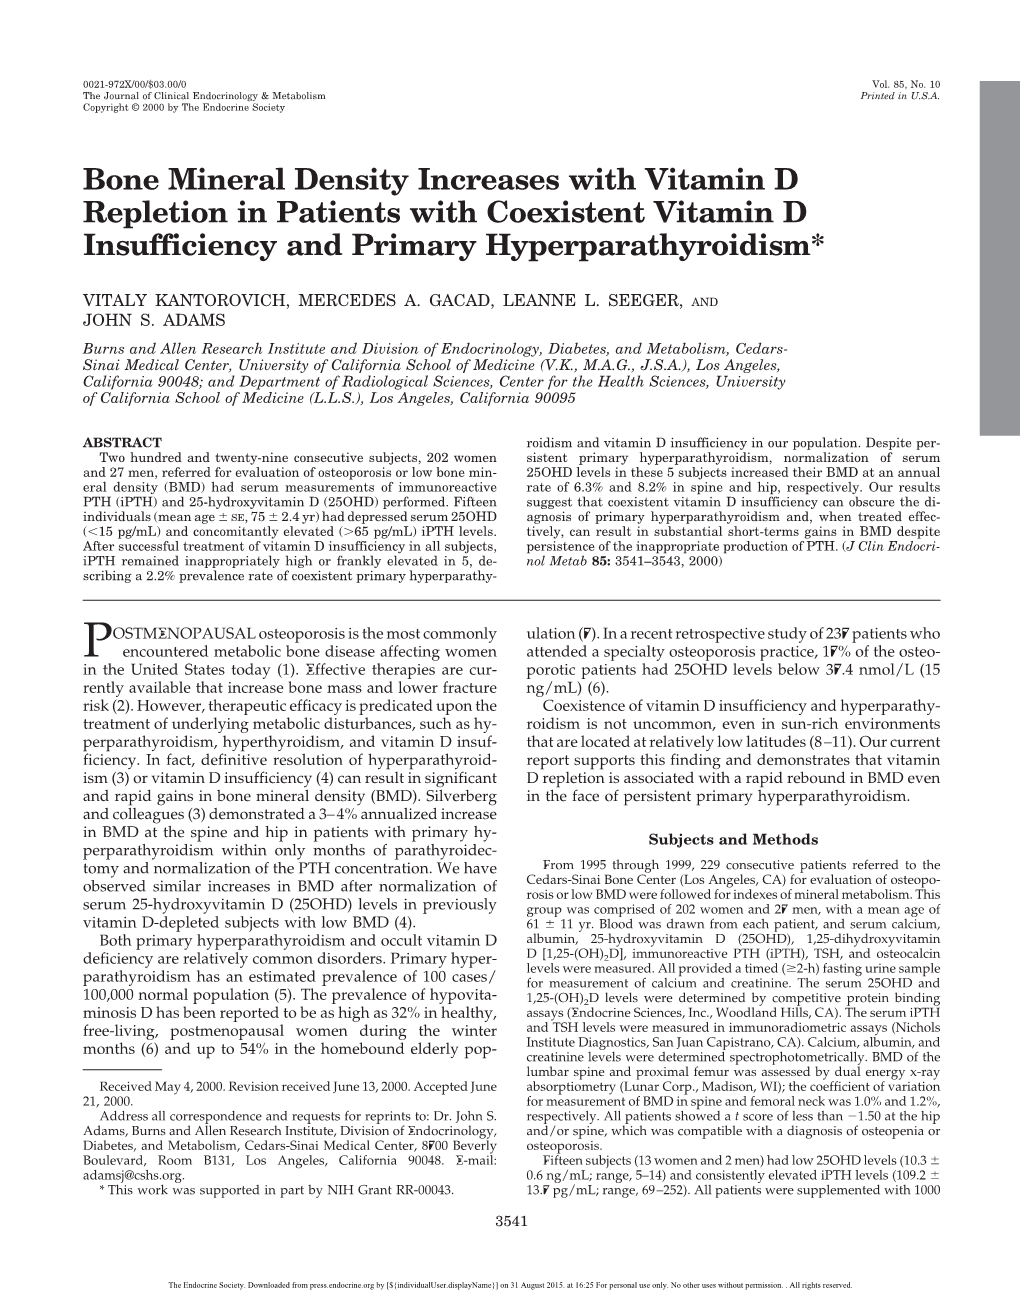 Bone Mineral Density Increases with Vitamin D Repletion in Patients with Coexistent Vitamin D Insufficiency and Primary Hyperparathyroidism*